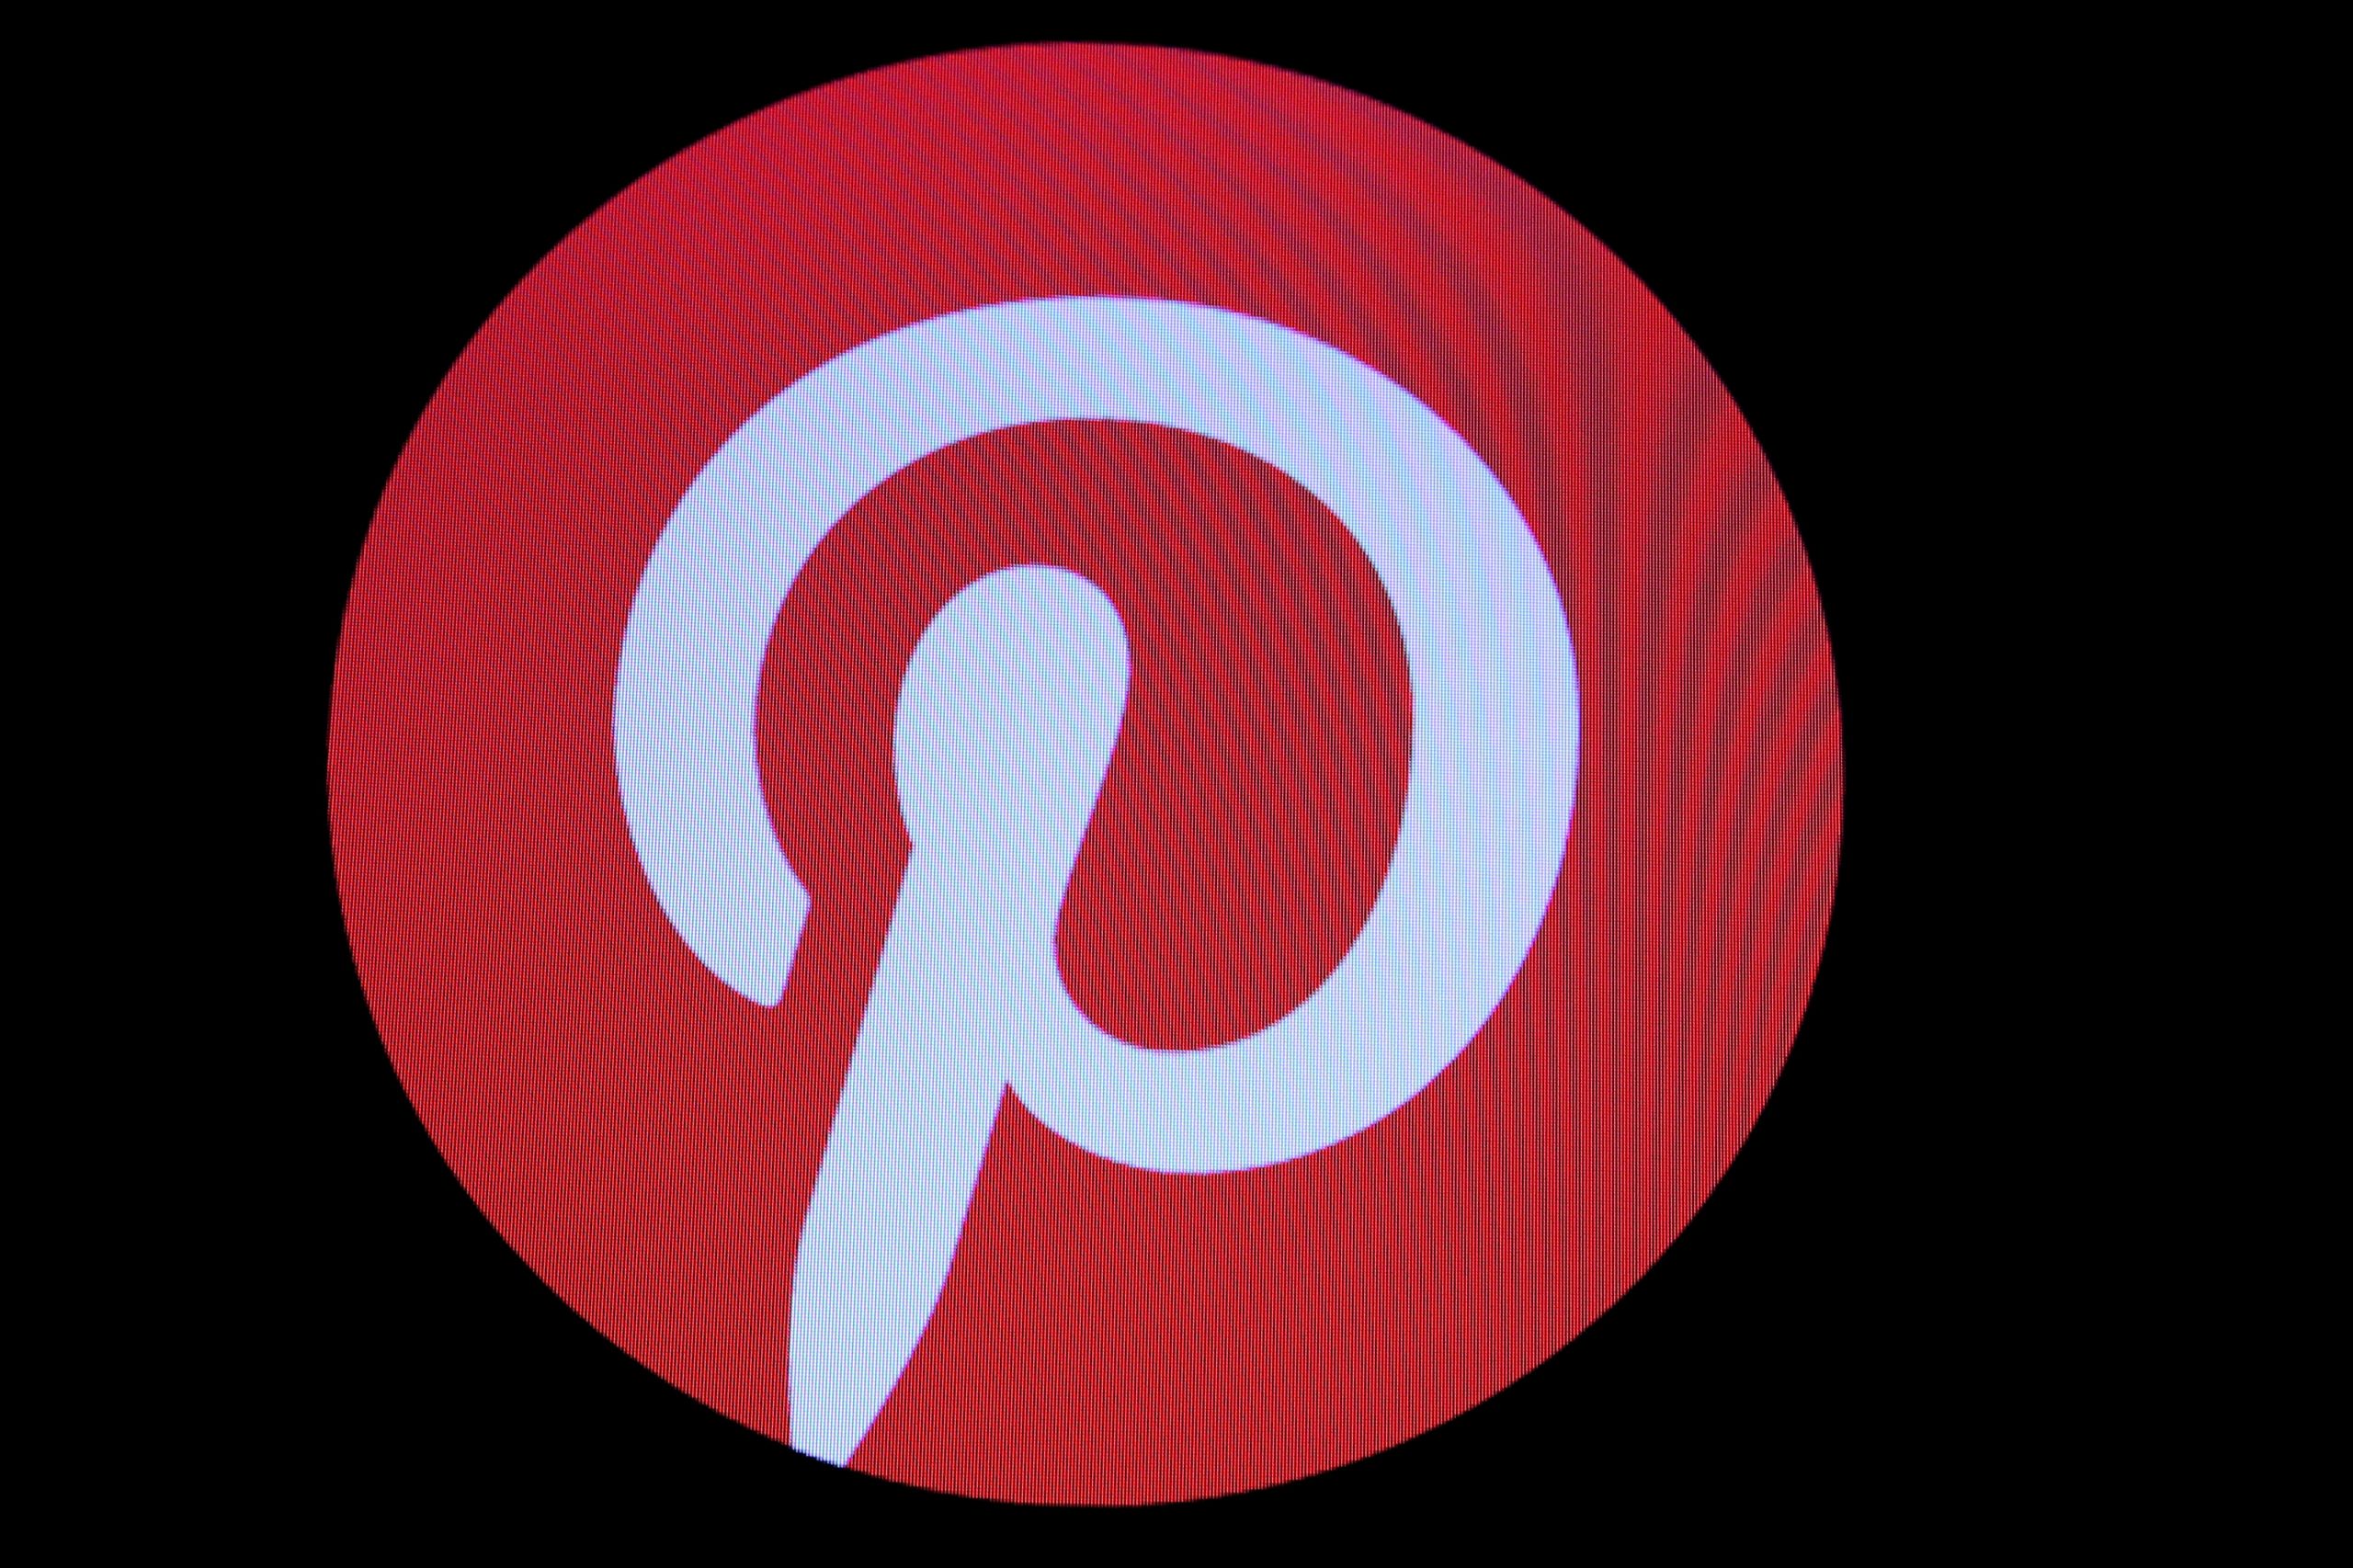 Pinterest is embracing body inclusivity in its search results